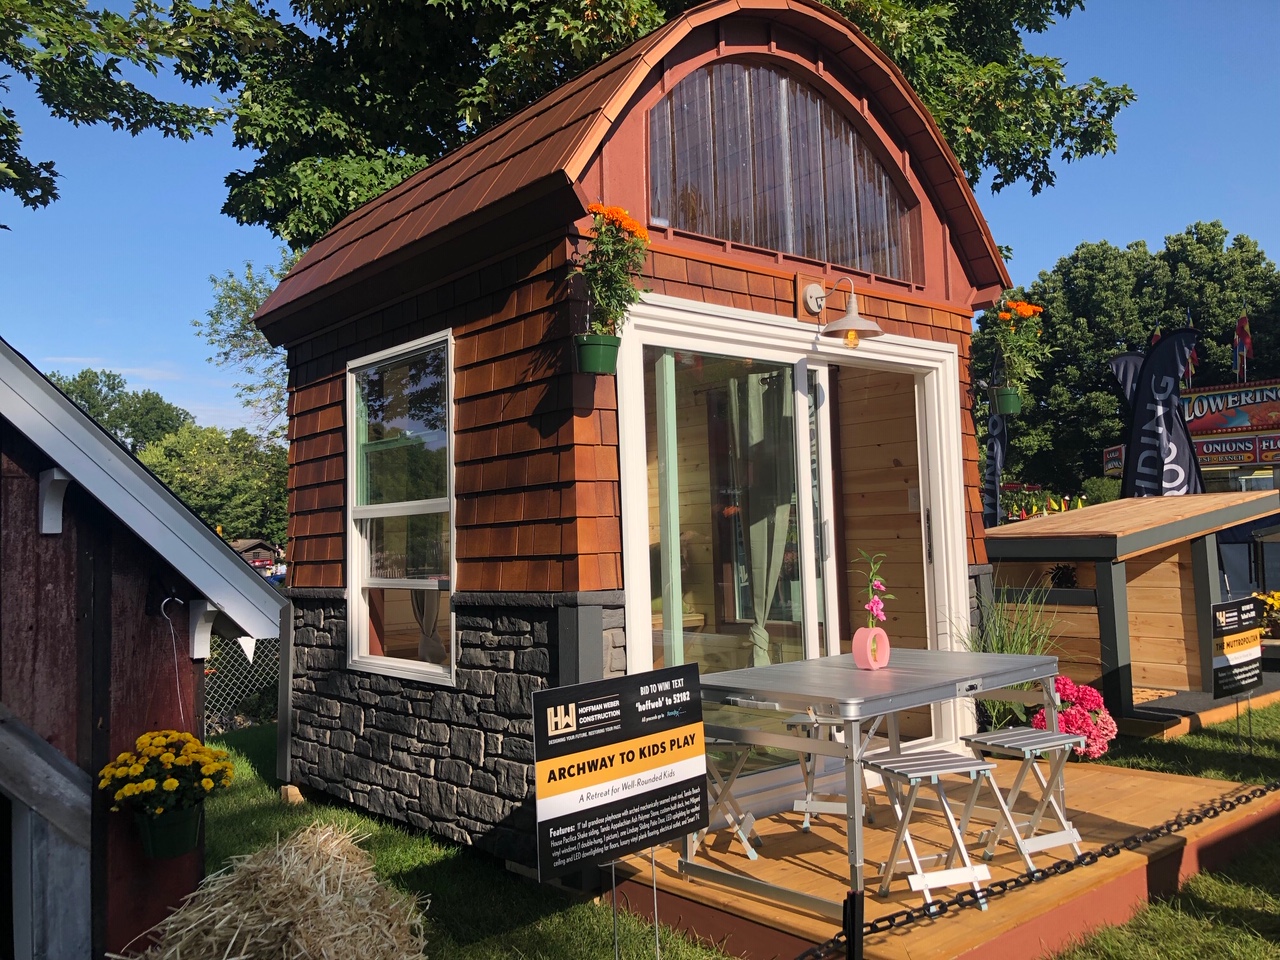 This gorgeous playhouse will be auctioned off by Hoffman Weber at the Minnesota State Fair.